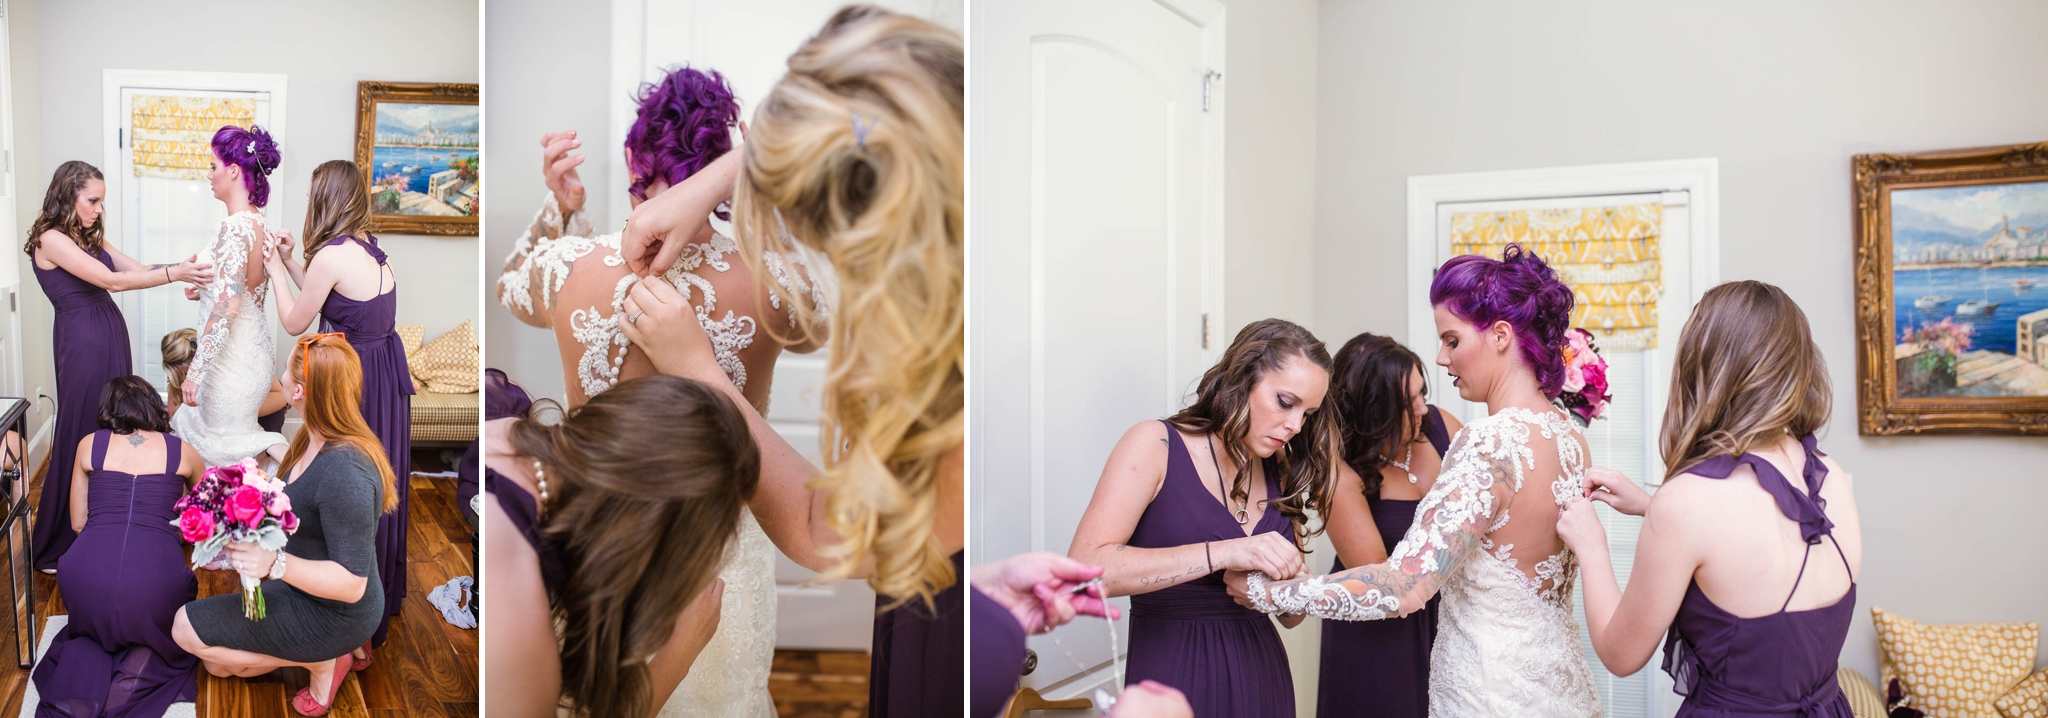 Bride getting ready and putting on her dress with her bridesmaids - Brittany + Jonathan - Raleigh North Carolina Wedding Photographer